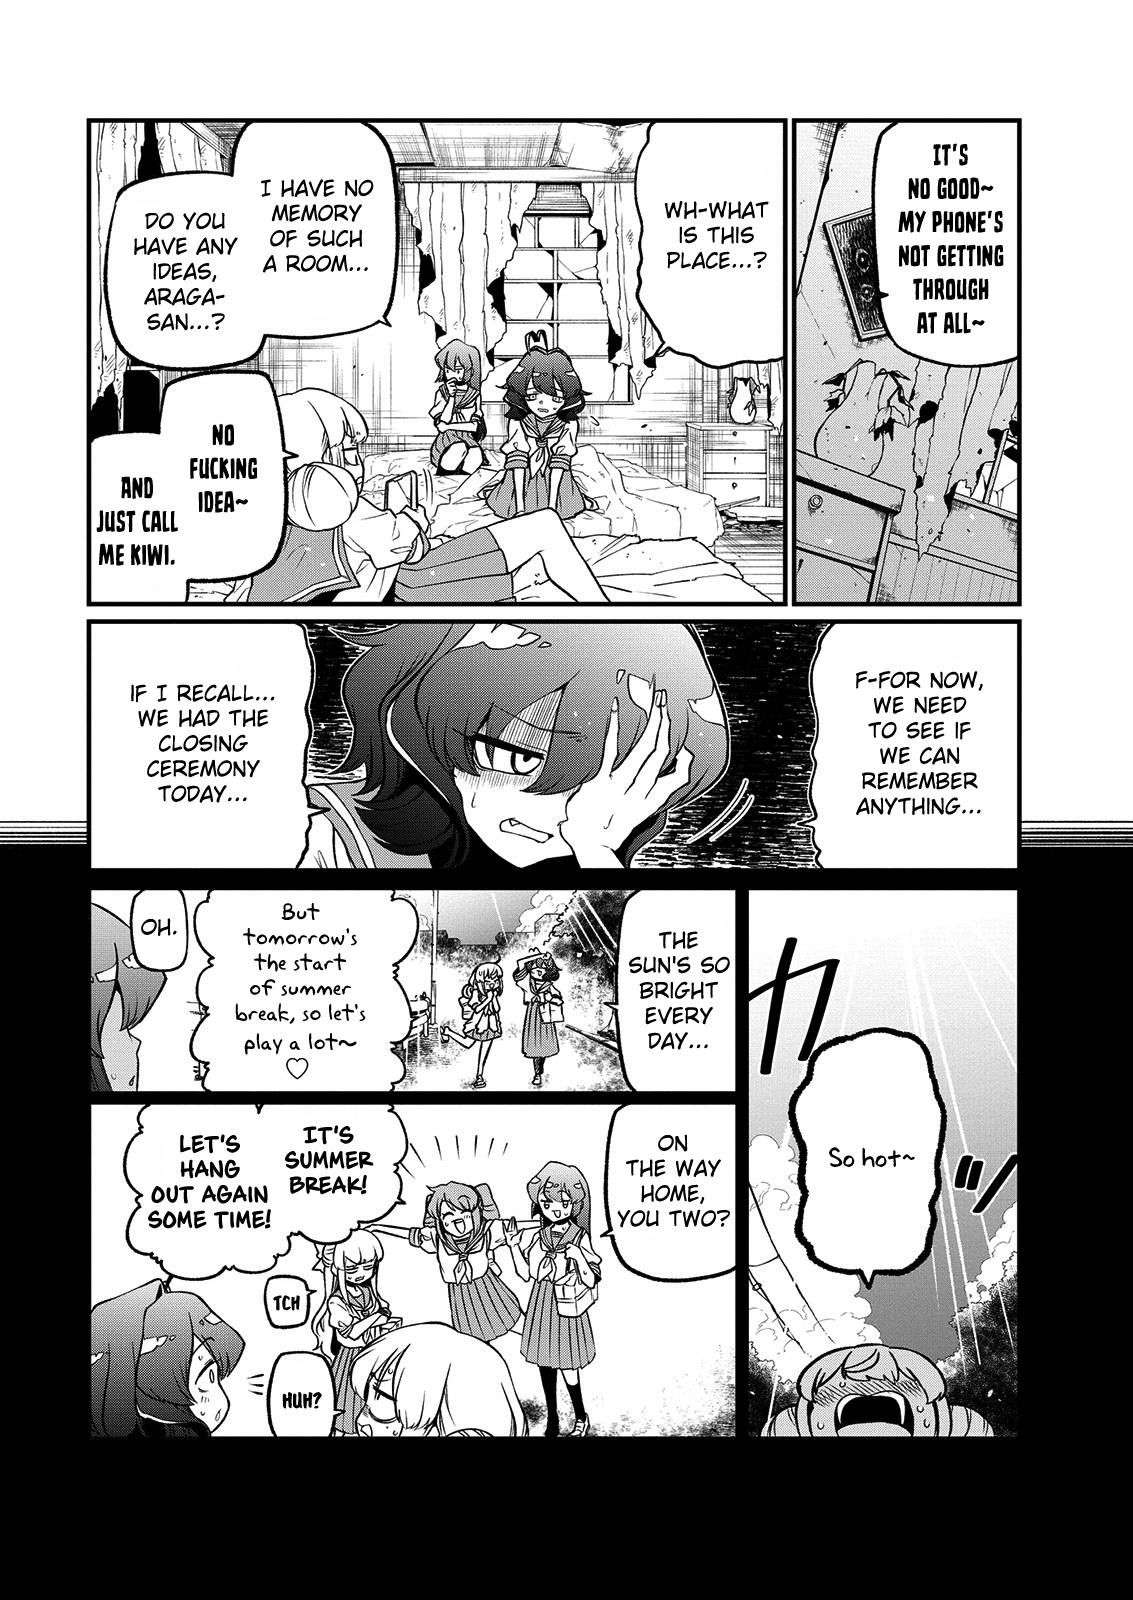 Gushing over Magical Girls - chapter 40 - #4